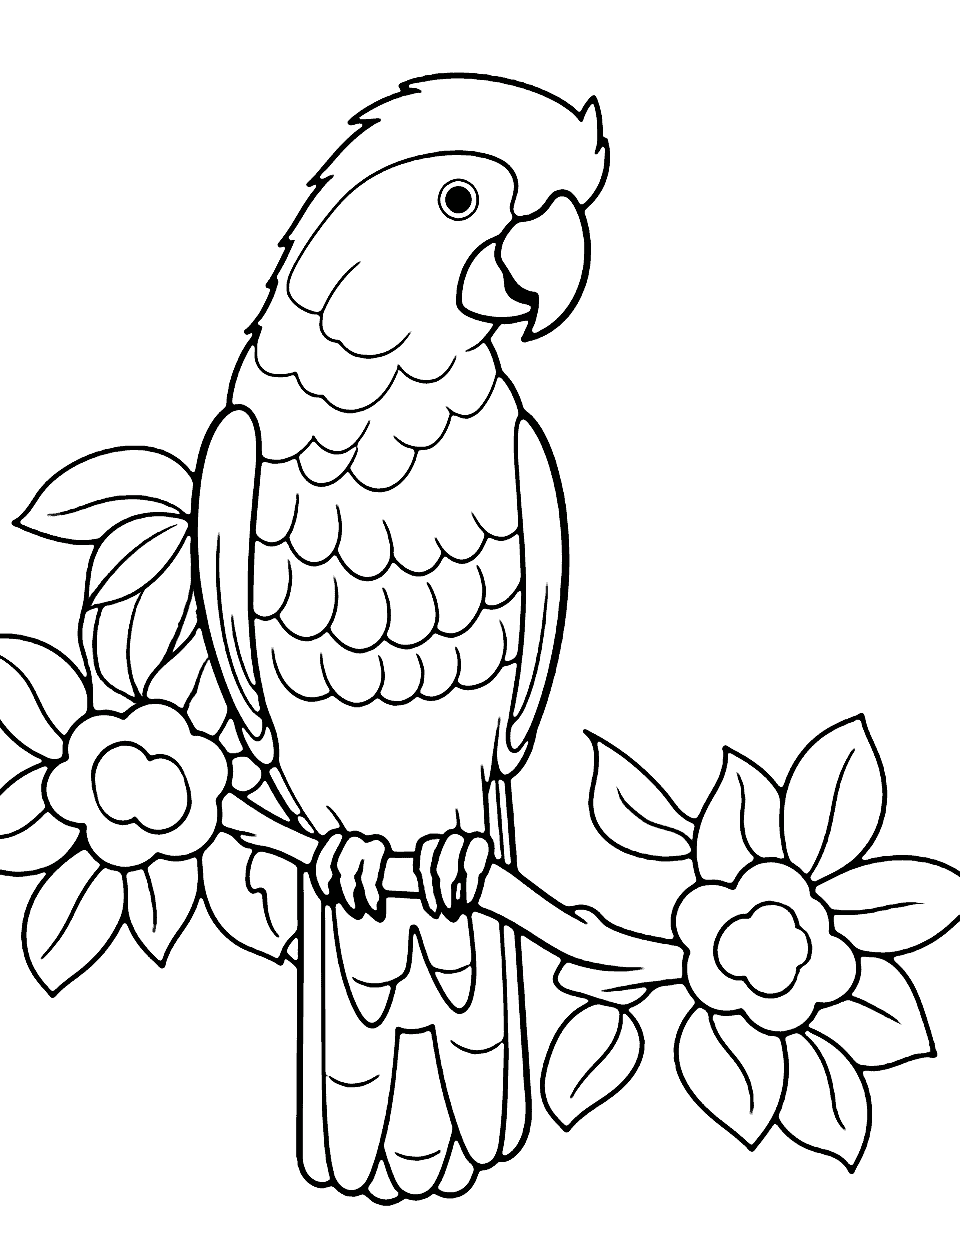 Colorful Parrot Animal Coloring Page - A vibrant parrot perched on a branch, surrounded by tropical flowers.